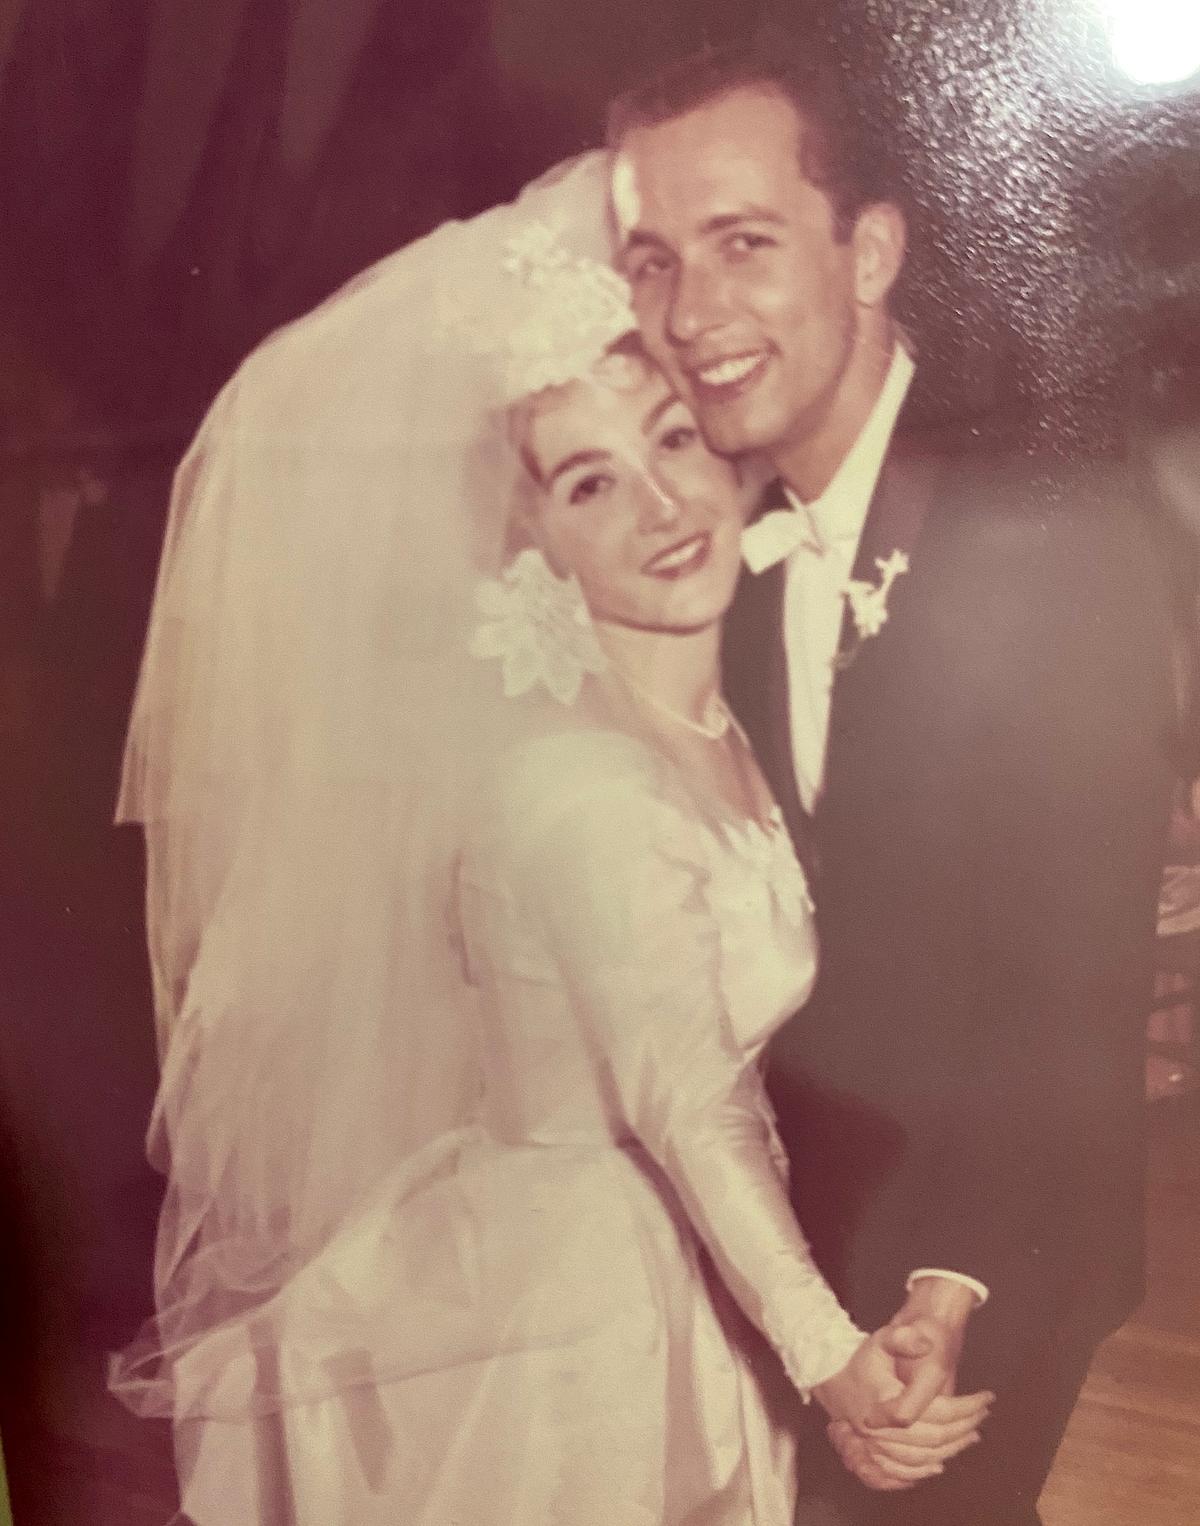 Phyllis and Barry tied the knot in 1961. (Courtesy of <a href="https://www.instagram.com/samnicolehamilton/">Sami Hamilton</a>)